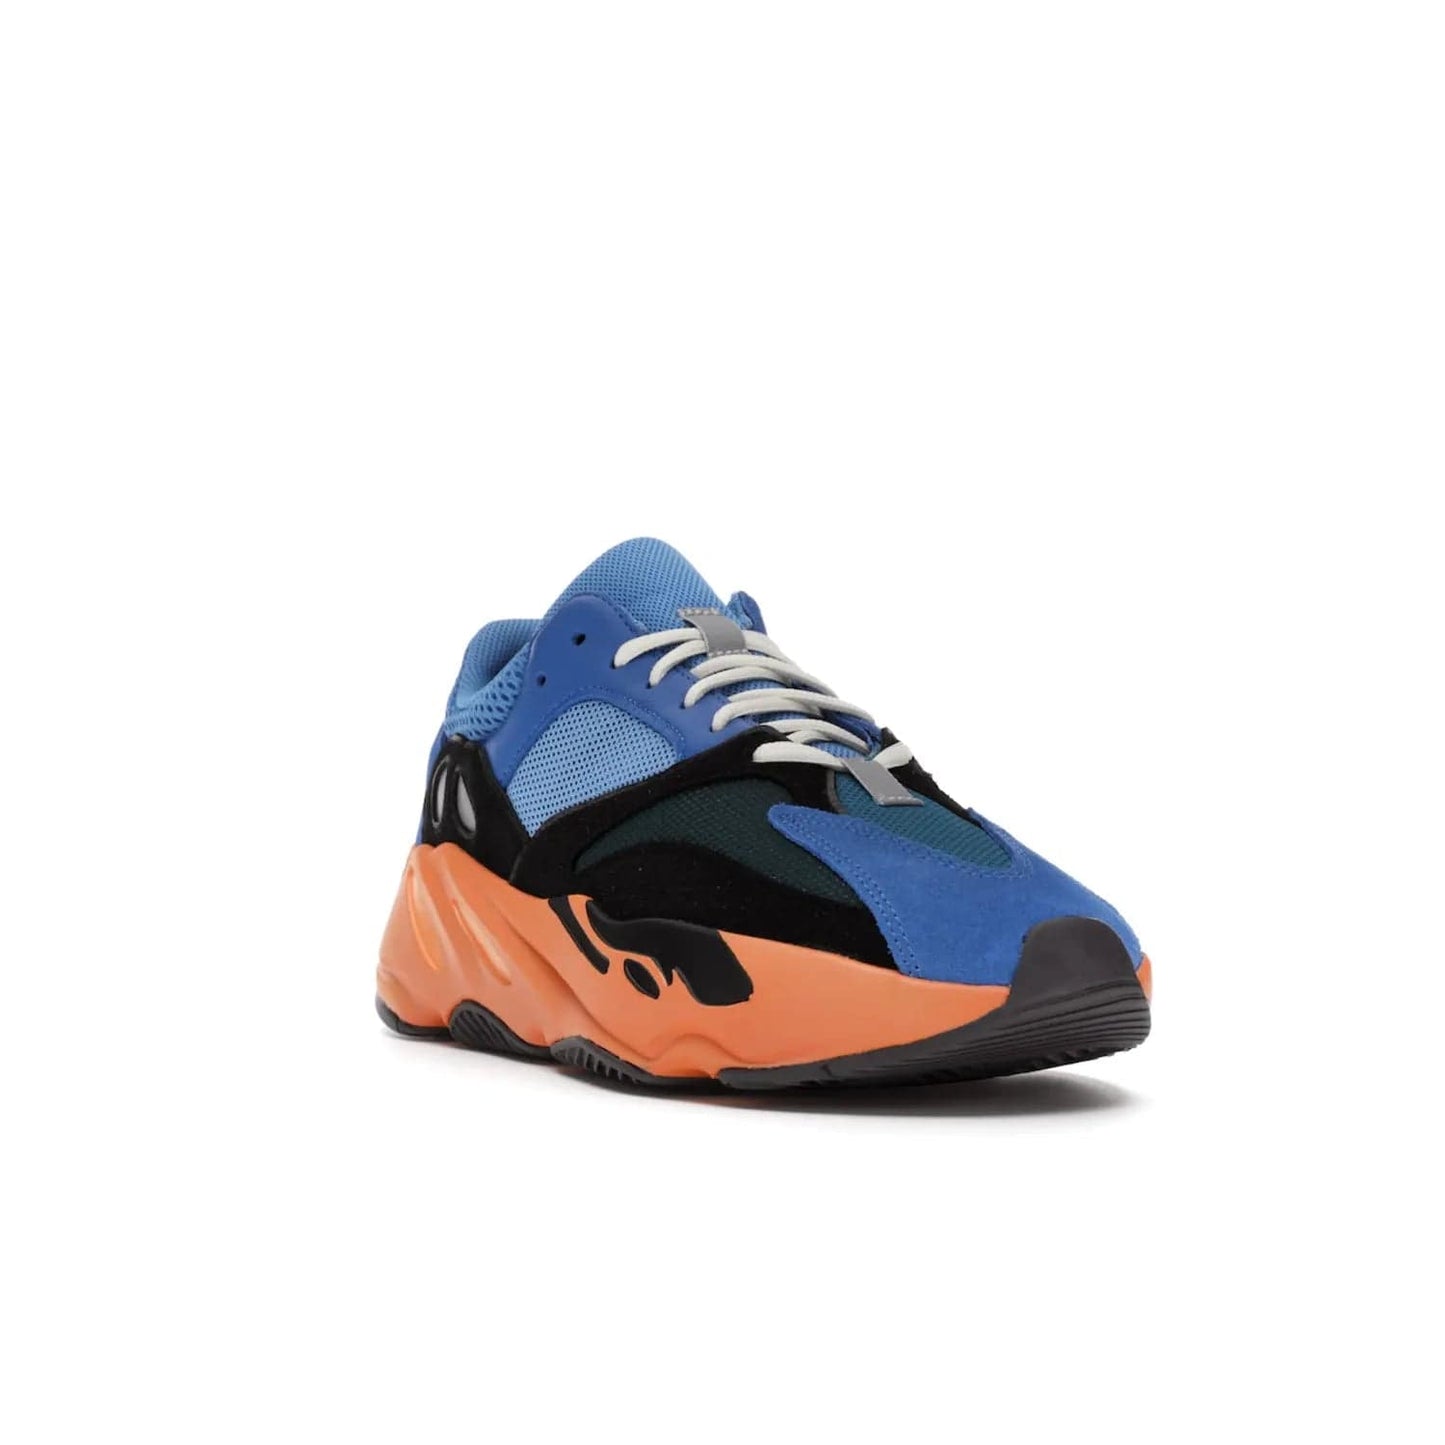 adidas Yeezy Boost 700 Bright Blue - Image 7 - Only at www.BallersClubKickz.com - Iconic sneaker style meets vibrant colour with the adidas Yeezy Boost 700 Bright Blue. Reflective accents, turquoise and teal panels, bright orange midsole and black outsole make for a bold release. April 2021.